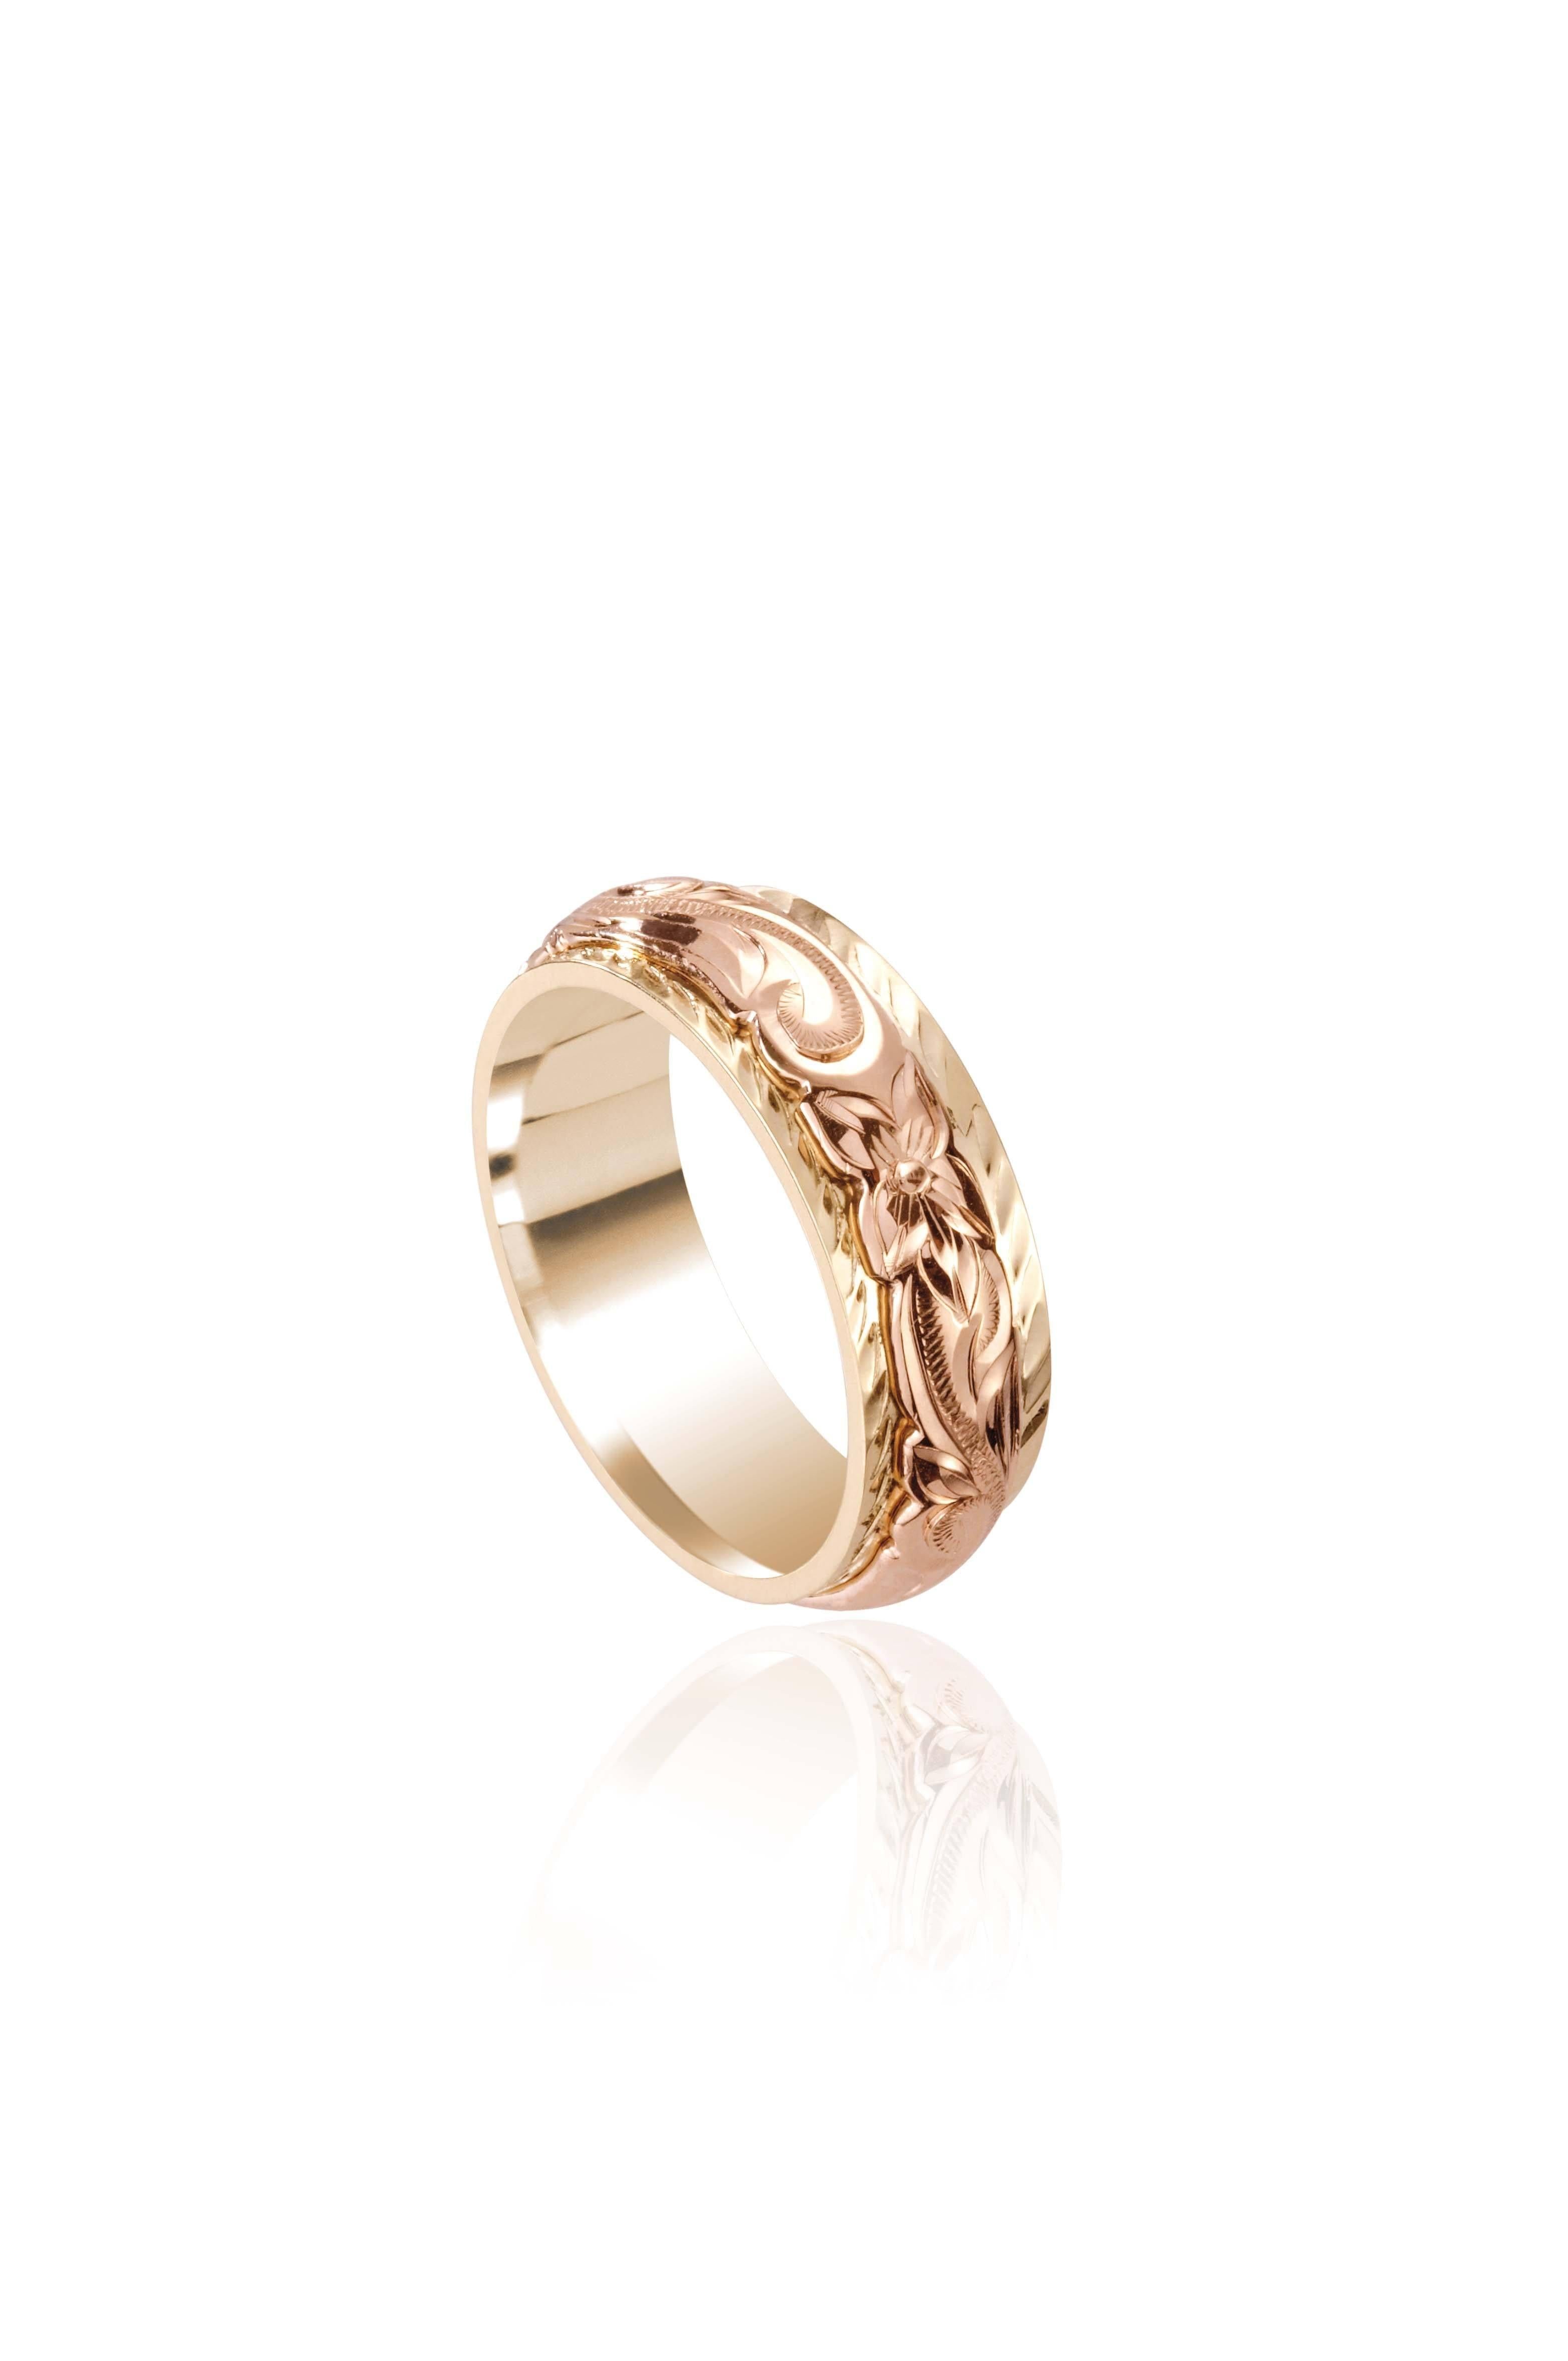 In this photo there is a rose and yellow gold two-tone ring with flower and scroll hand engravings.